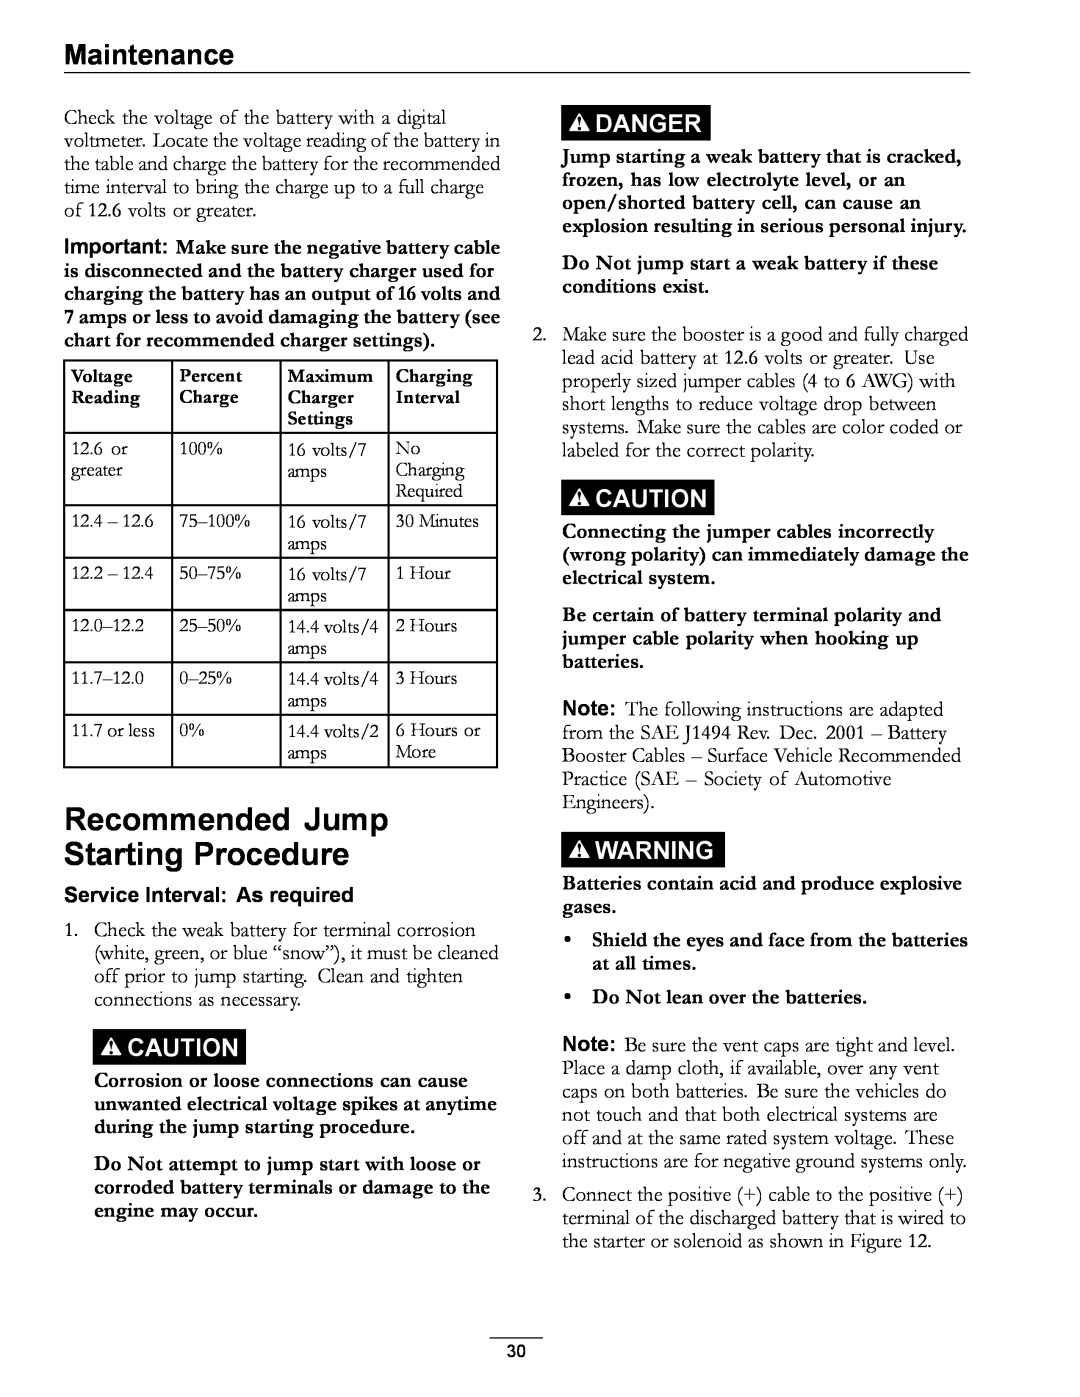 Exmark 920 Recommended Jump Starting Procedure, Service Interval As required, Do Not lean over the batteries, Maintenance 